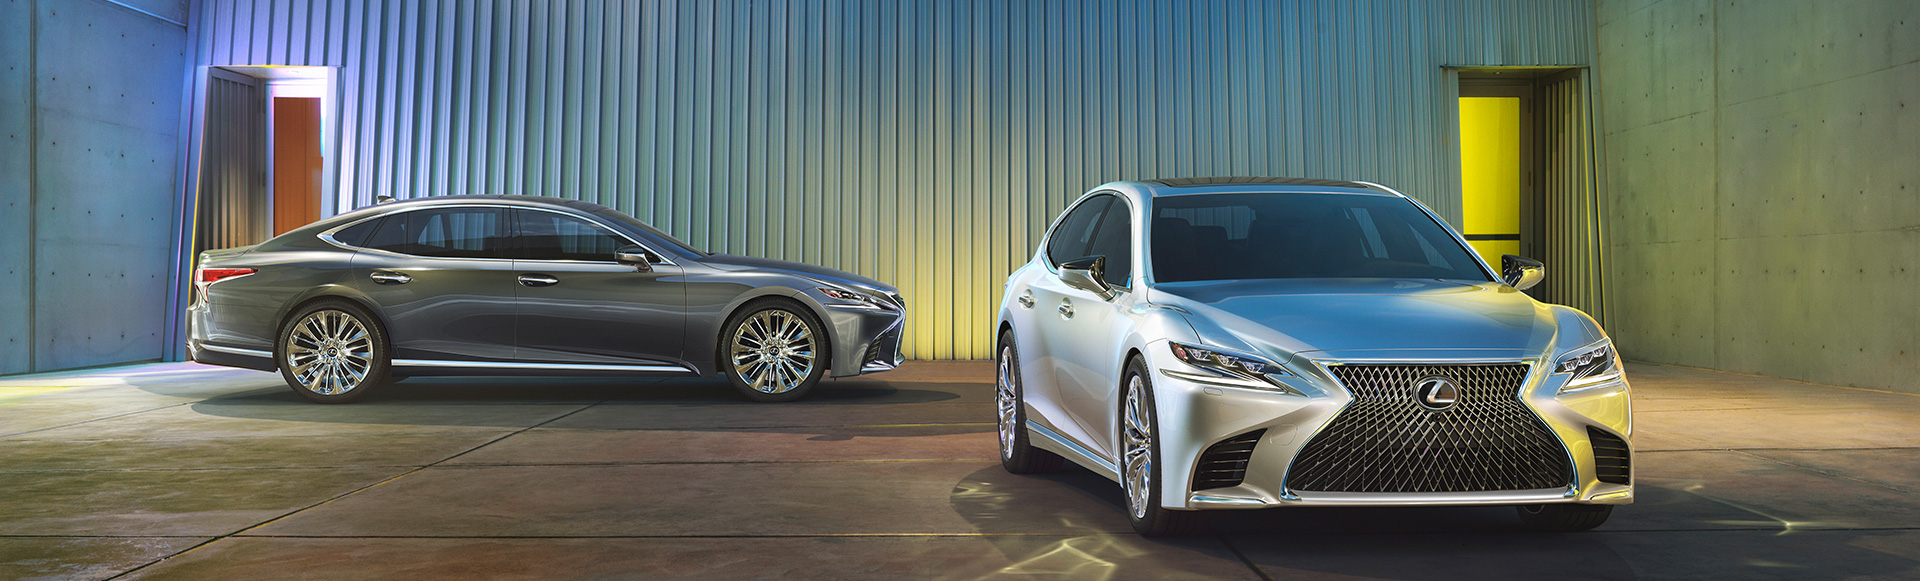 With the All-New 2018 LS, Lexus Reimagines Global Flagship Sedan